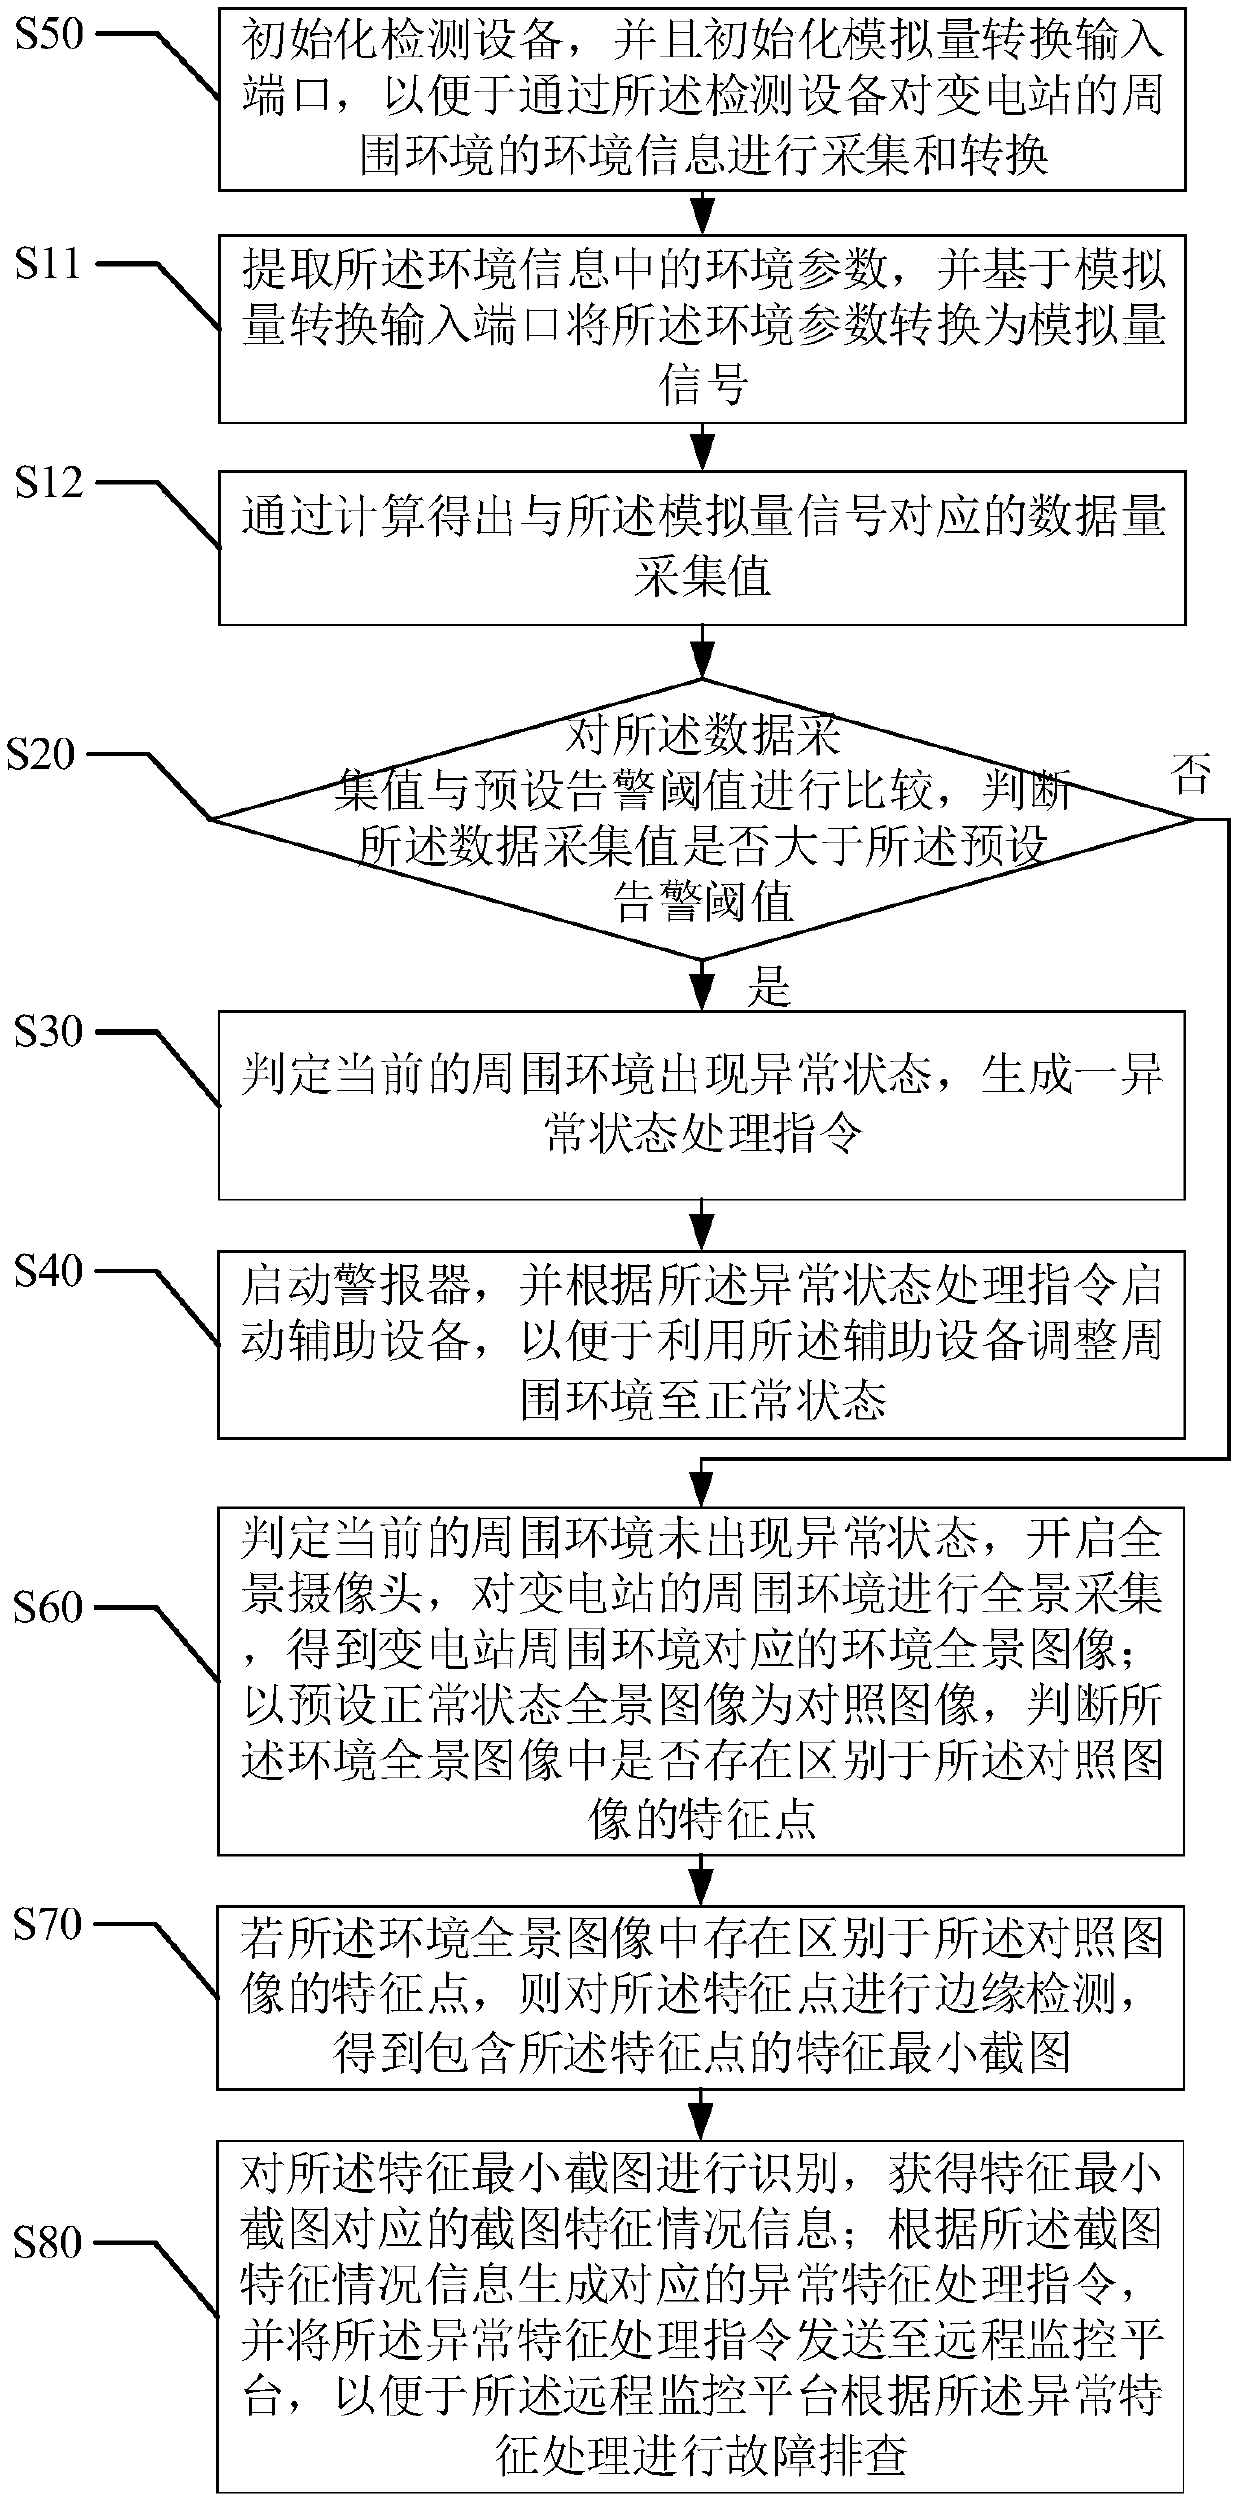 Transformer substation auxiliary facility detection control method and device